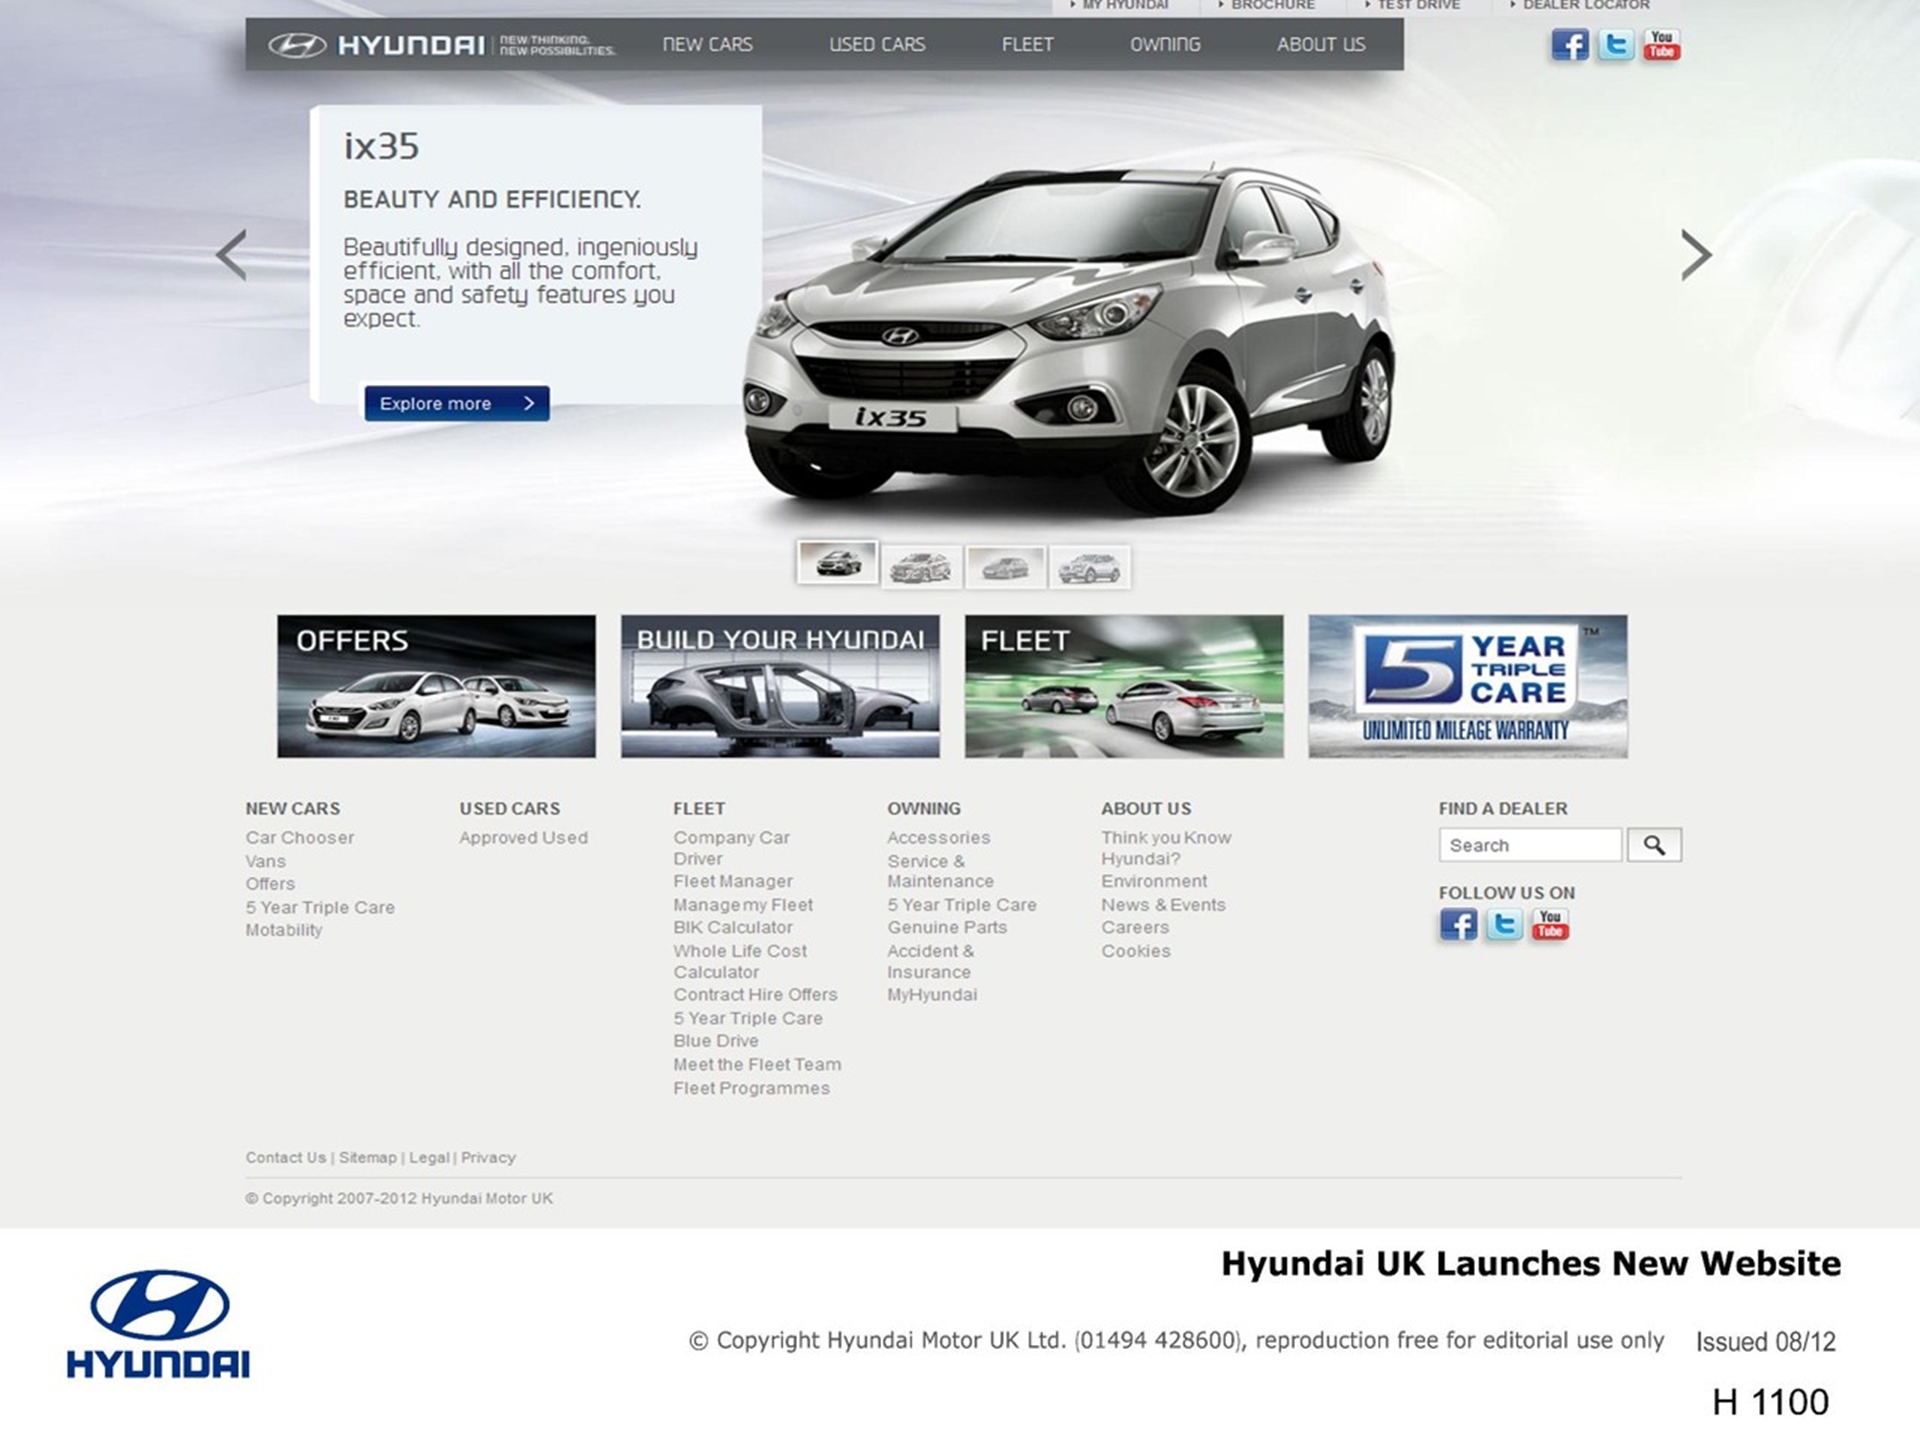 LAUNCH OF THE NEW GENERATION HYUNDAI WEBSITE